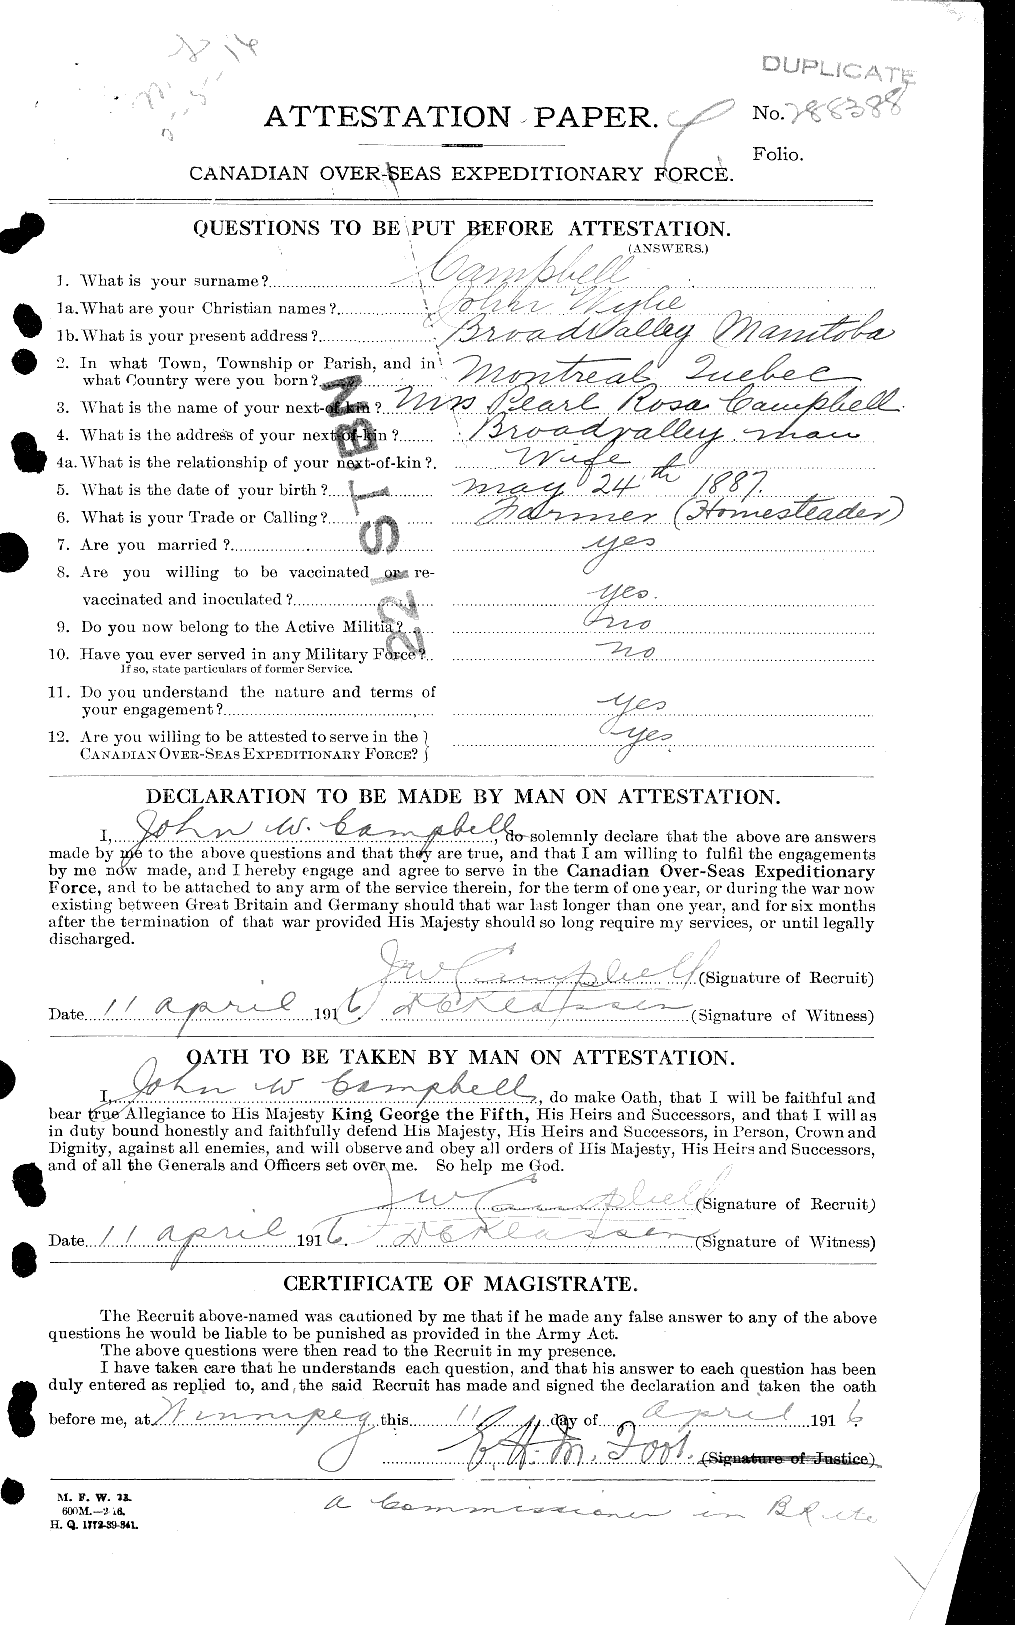 Personnel Records of the First World War - CEF 003812c